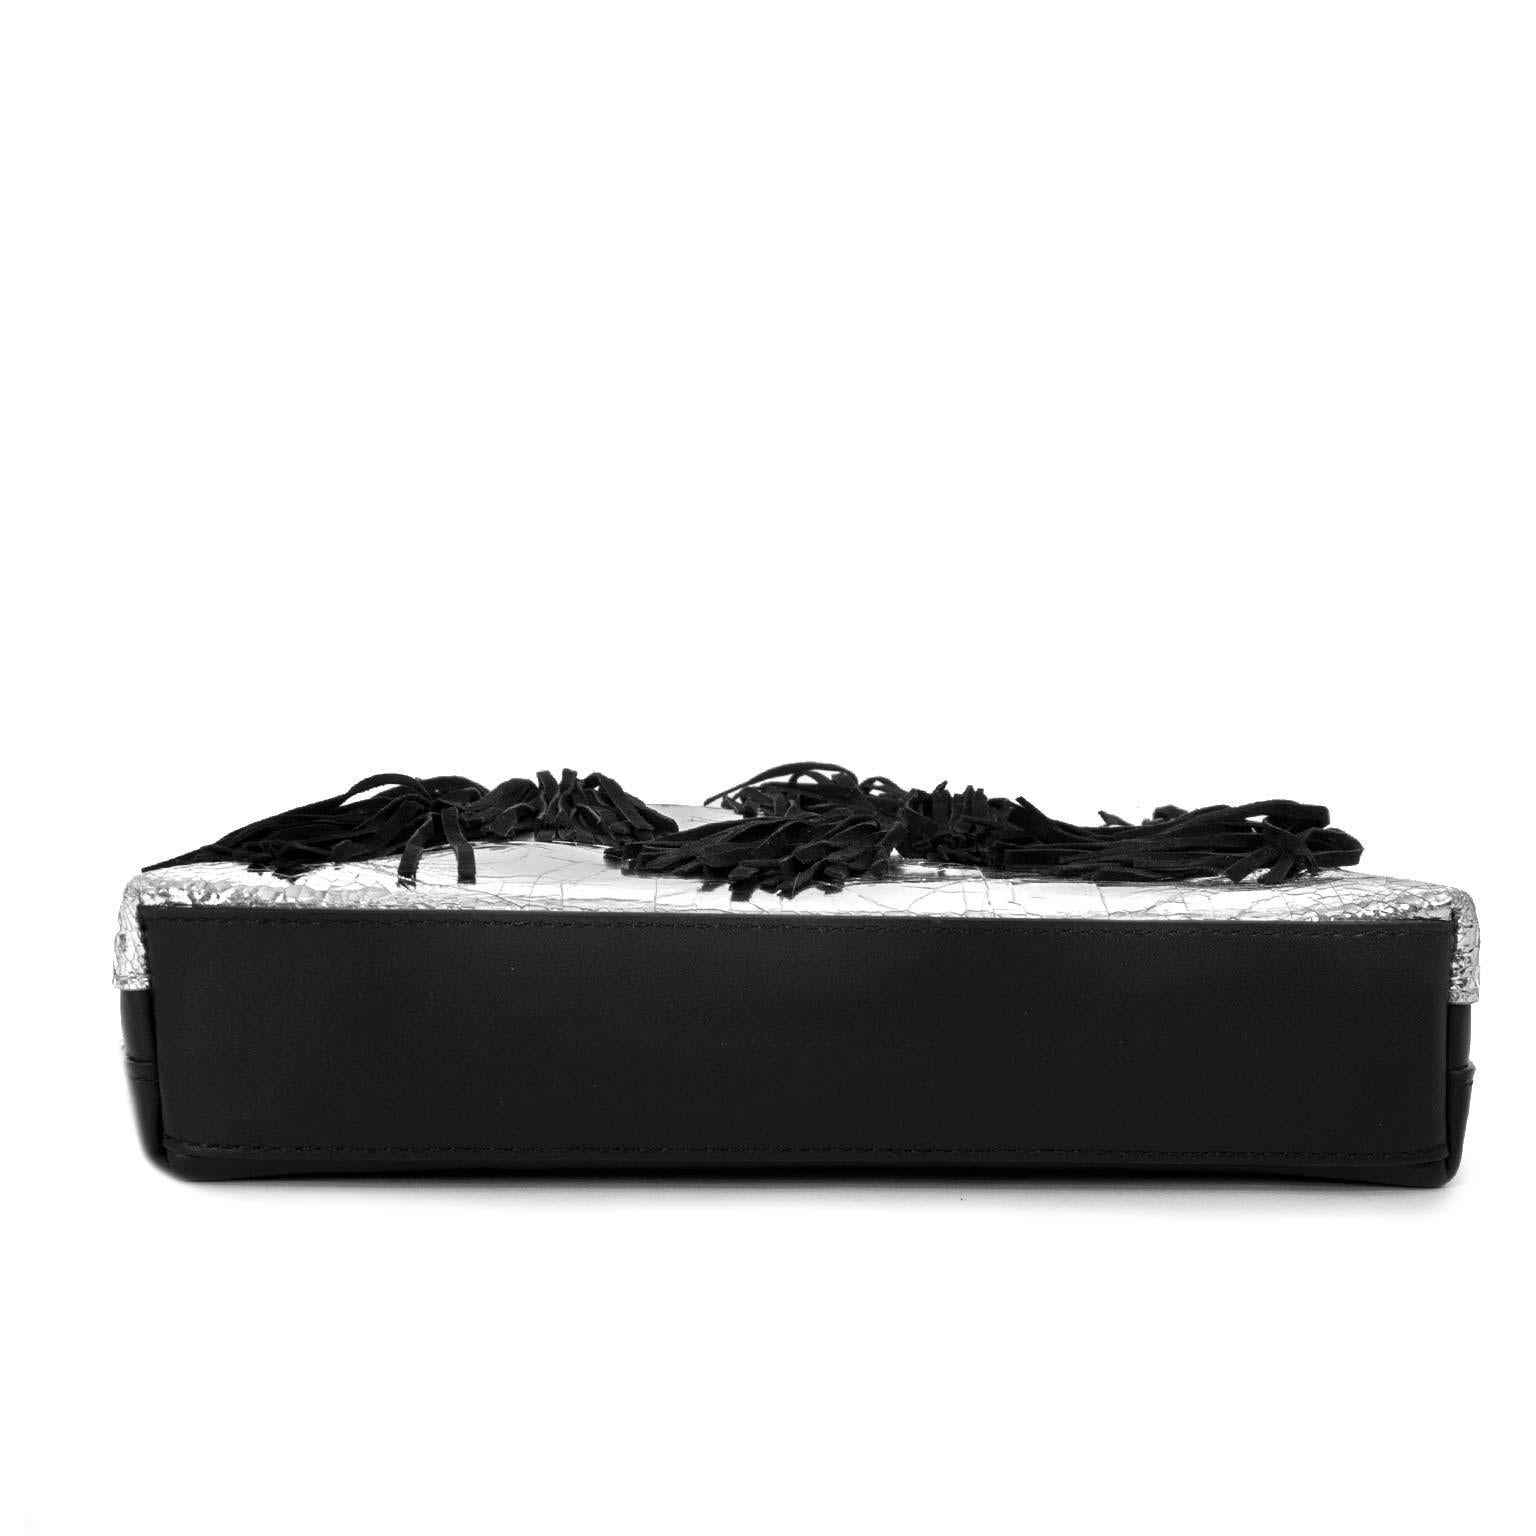 Women's 3.1 Phillip Lim 31 Minute Suede-Fringed Metallic Leather Clutch For Sale